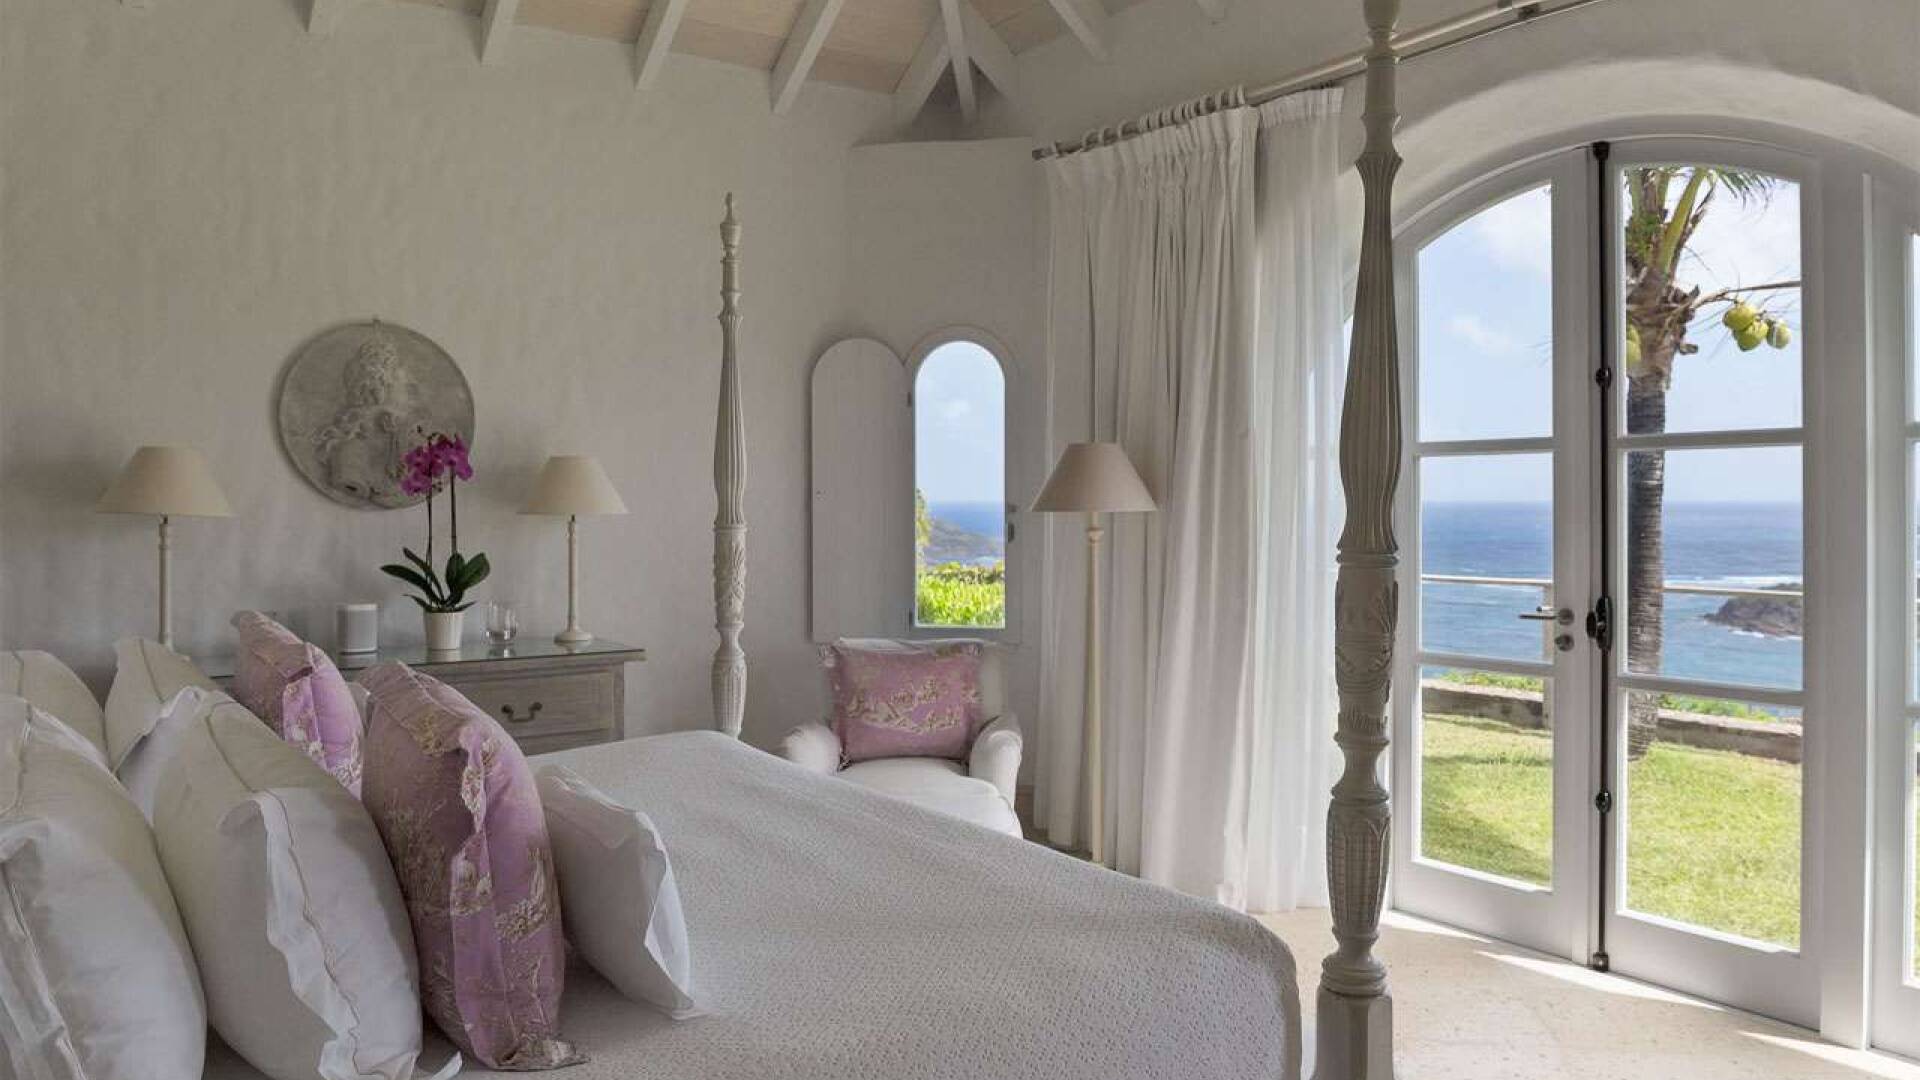 Bedroom at WV JAY, Mont Jean, St. Barthelemy